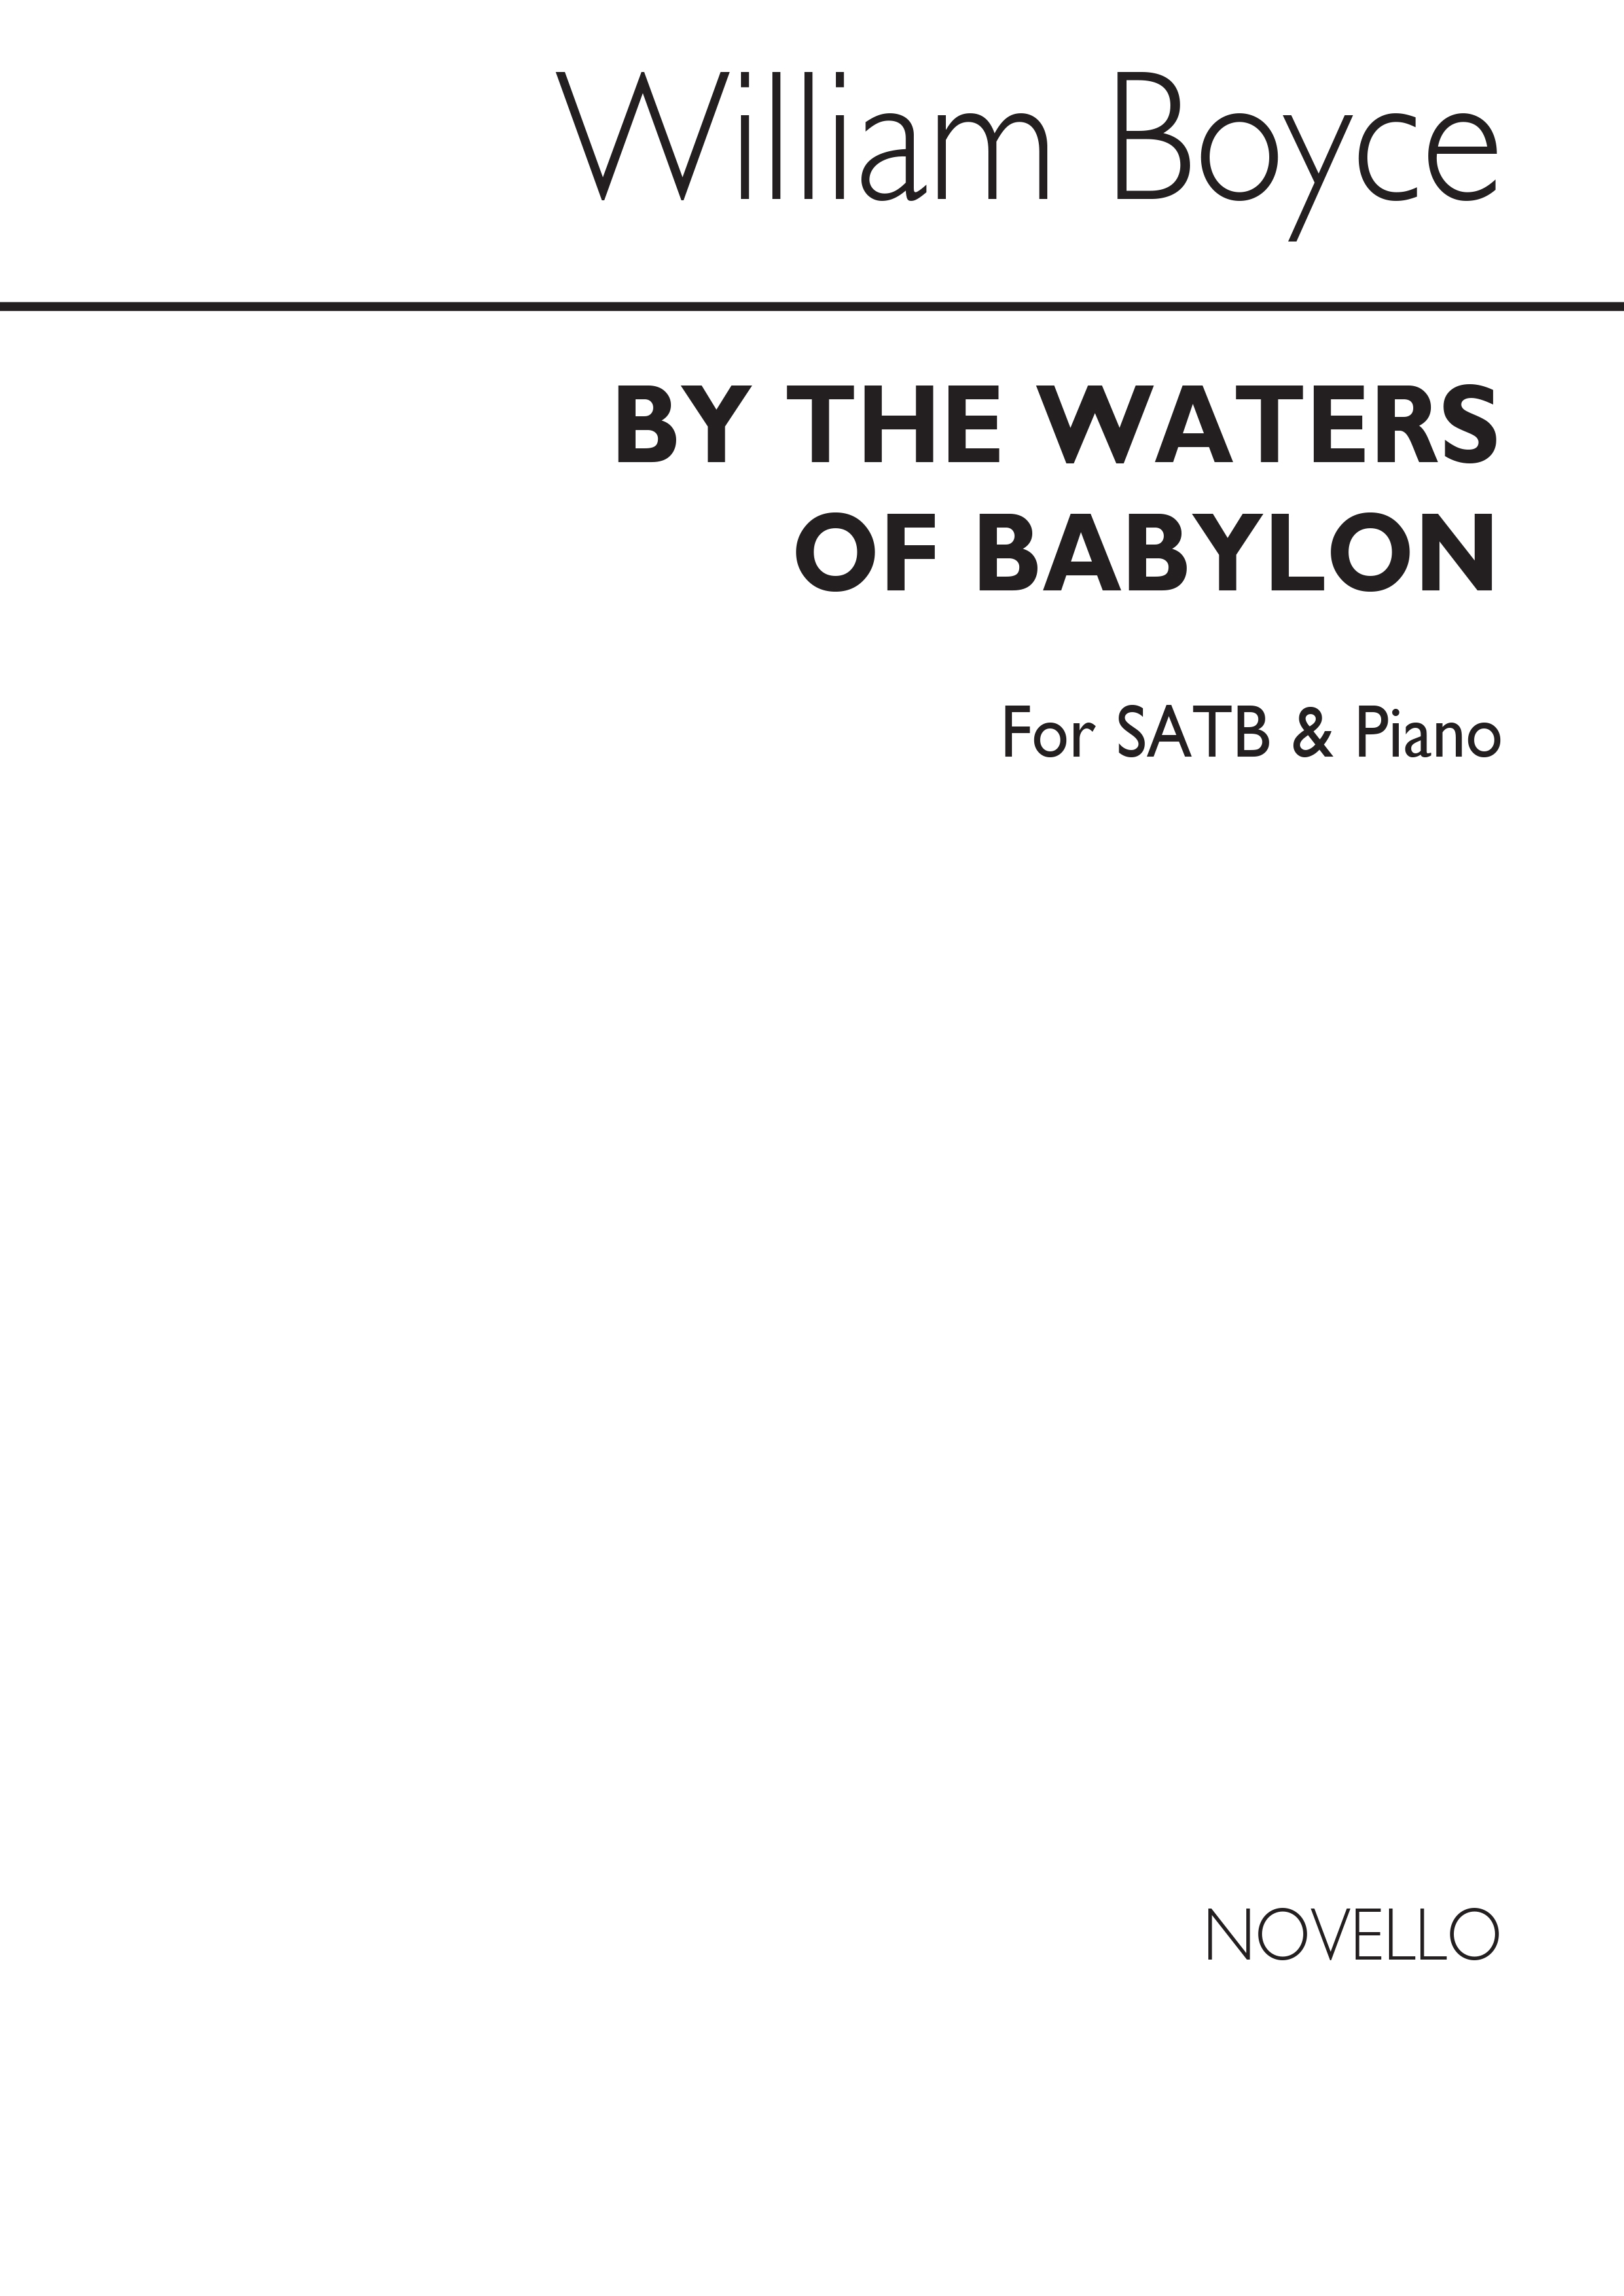 William Boyce: By The Waters Of Babylon (SATB)